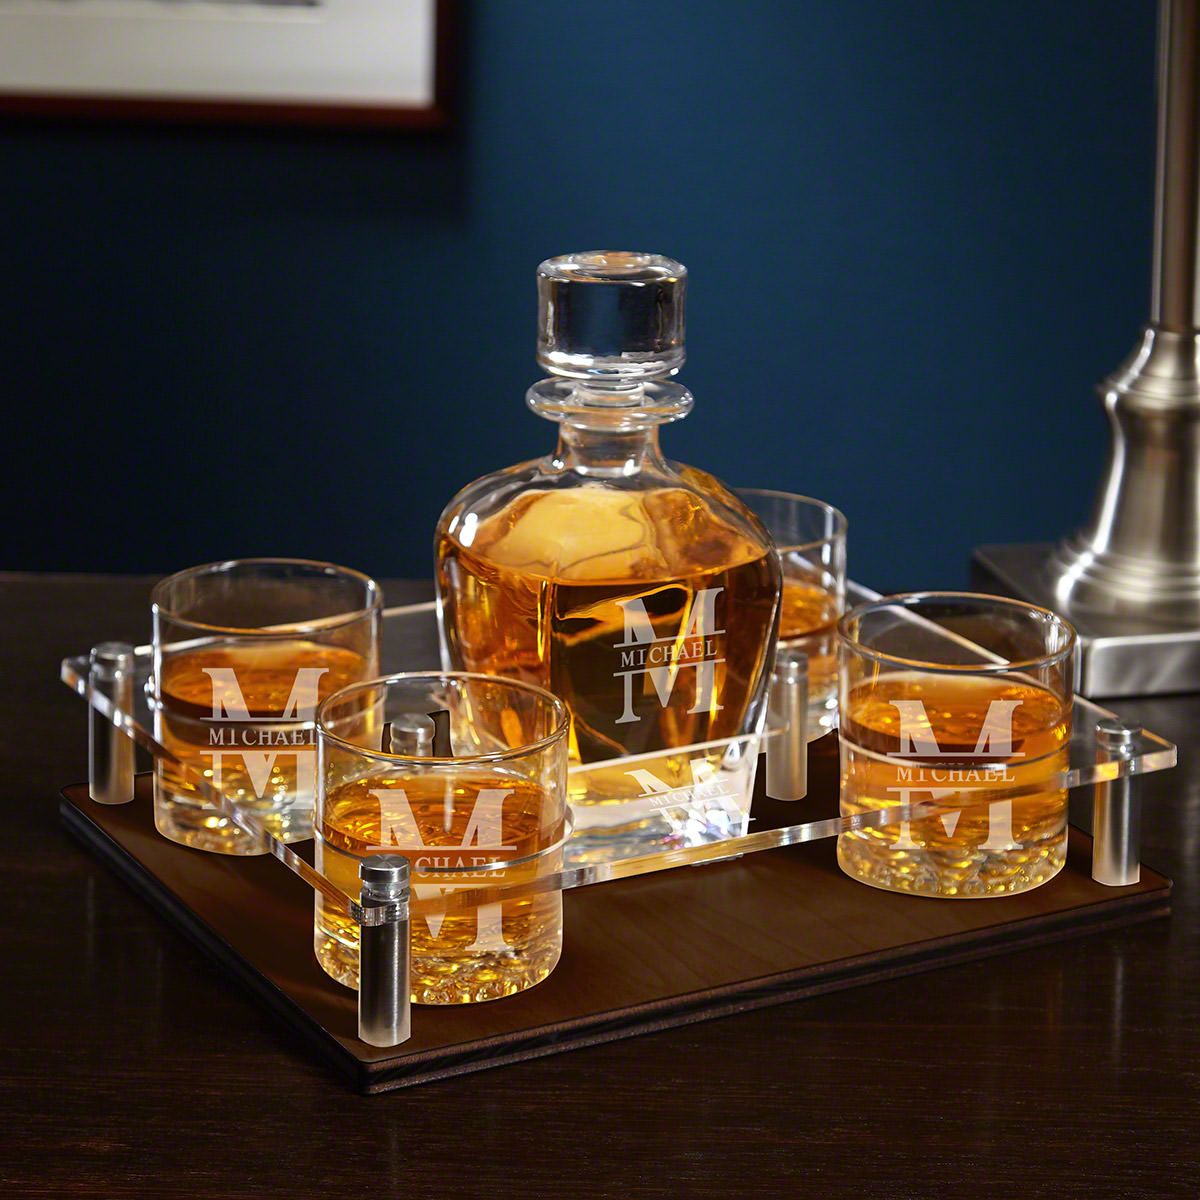 Monogrammed Whiskey Decanter Tray with Glasses - 6 pc Presentation Set